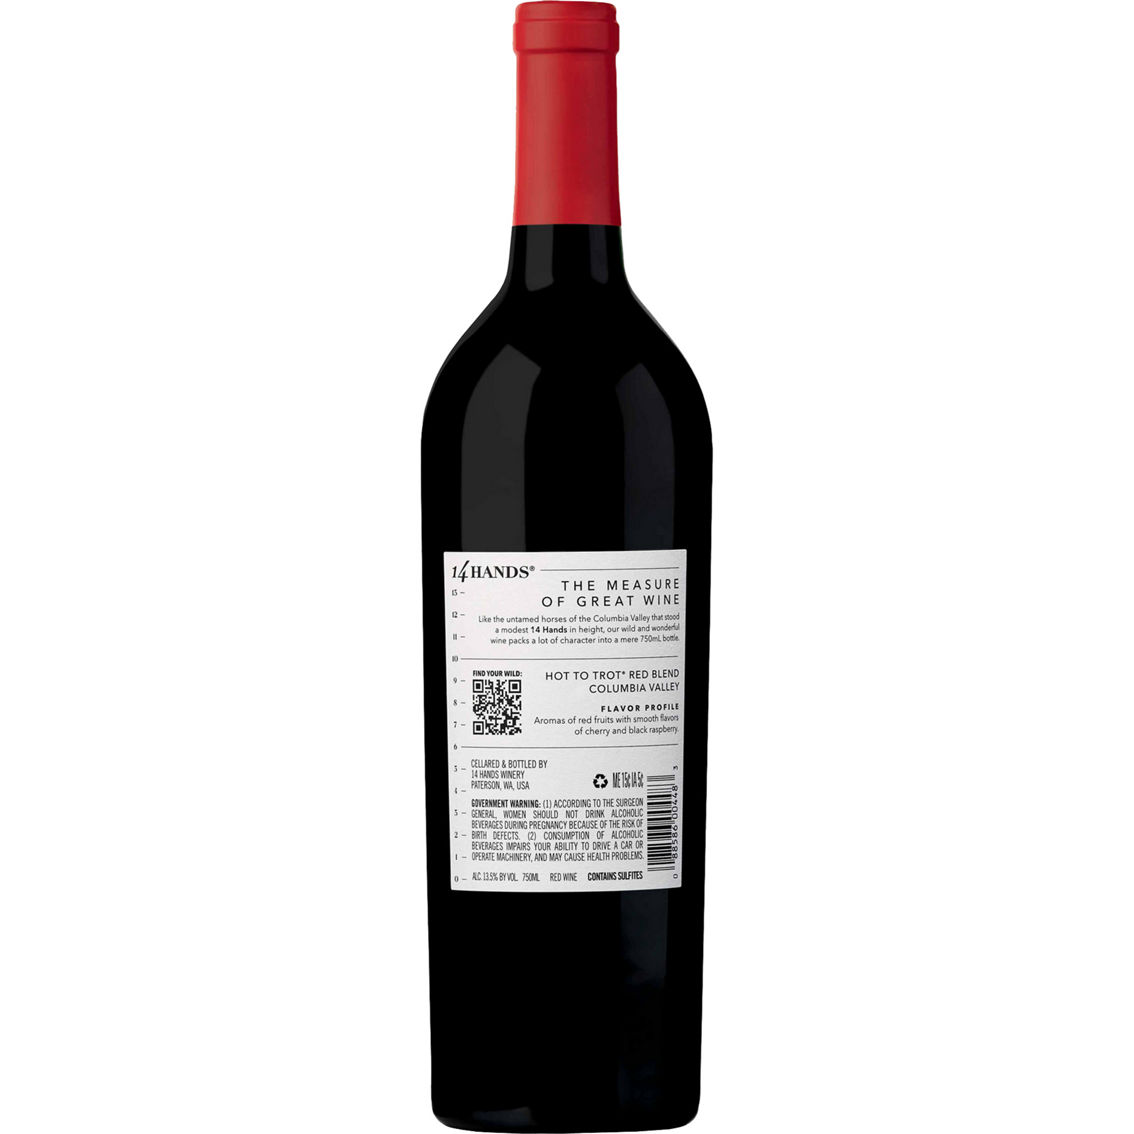 14 Hands Hot To Trot Red Blend 750ml - Image 2 of 2